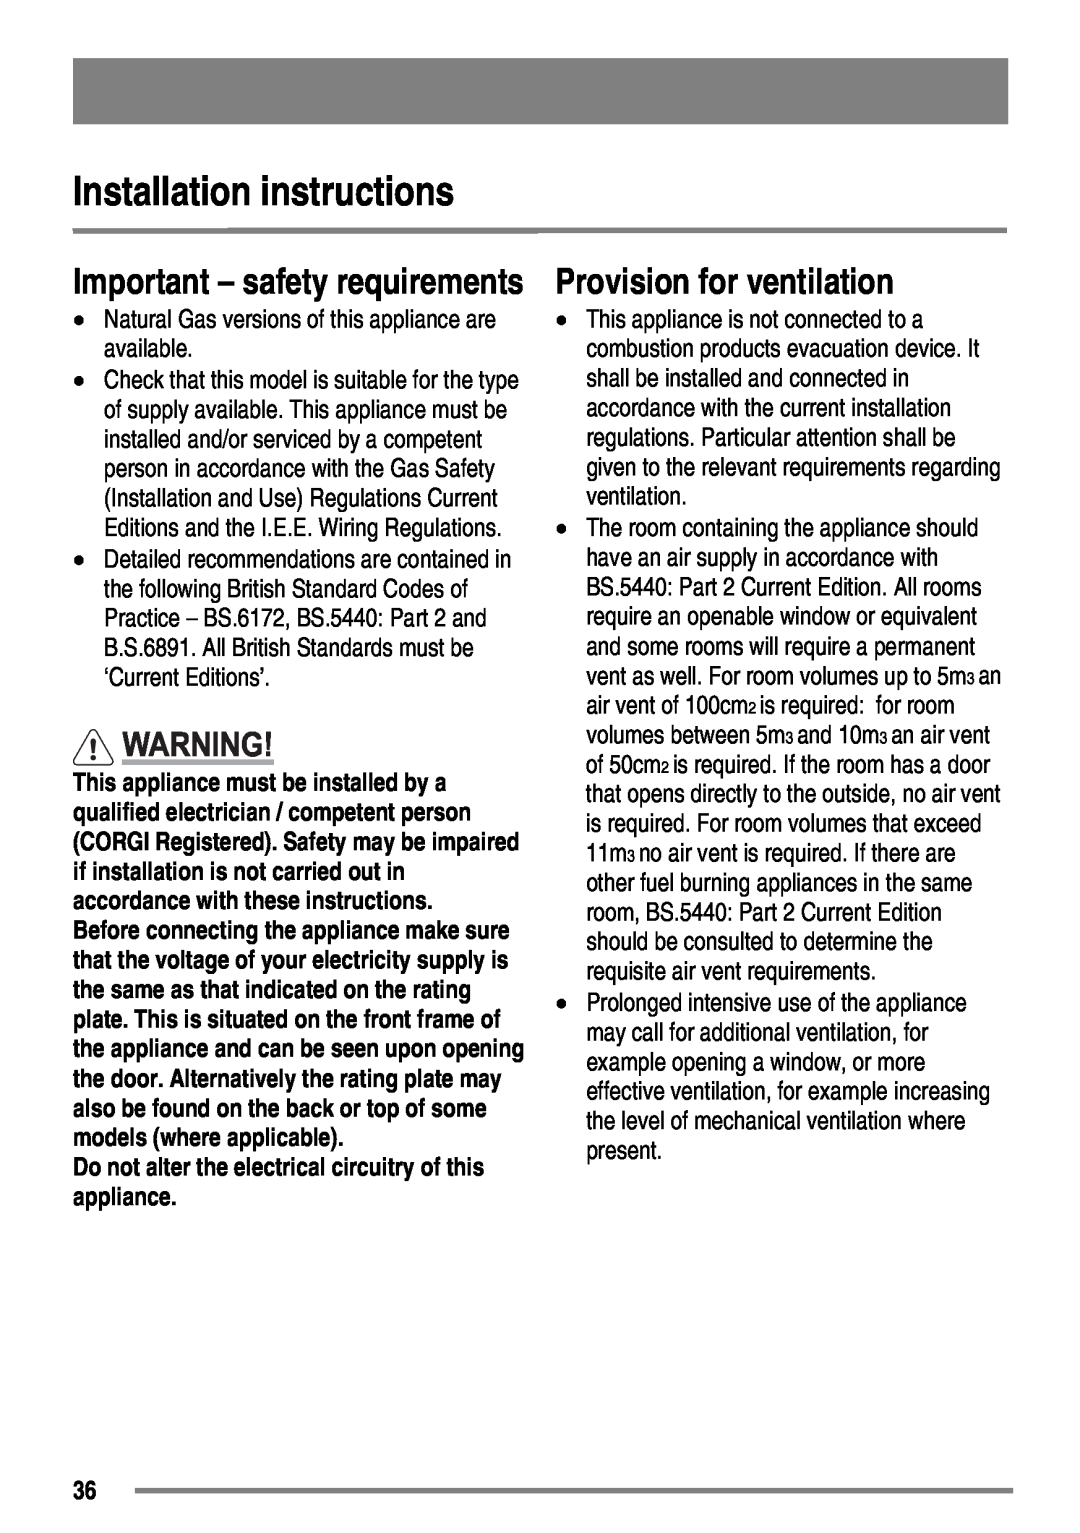 Zanussi ZKM6040 user manual Installation instructions, Provision for ventilation, Important - safety requirements 